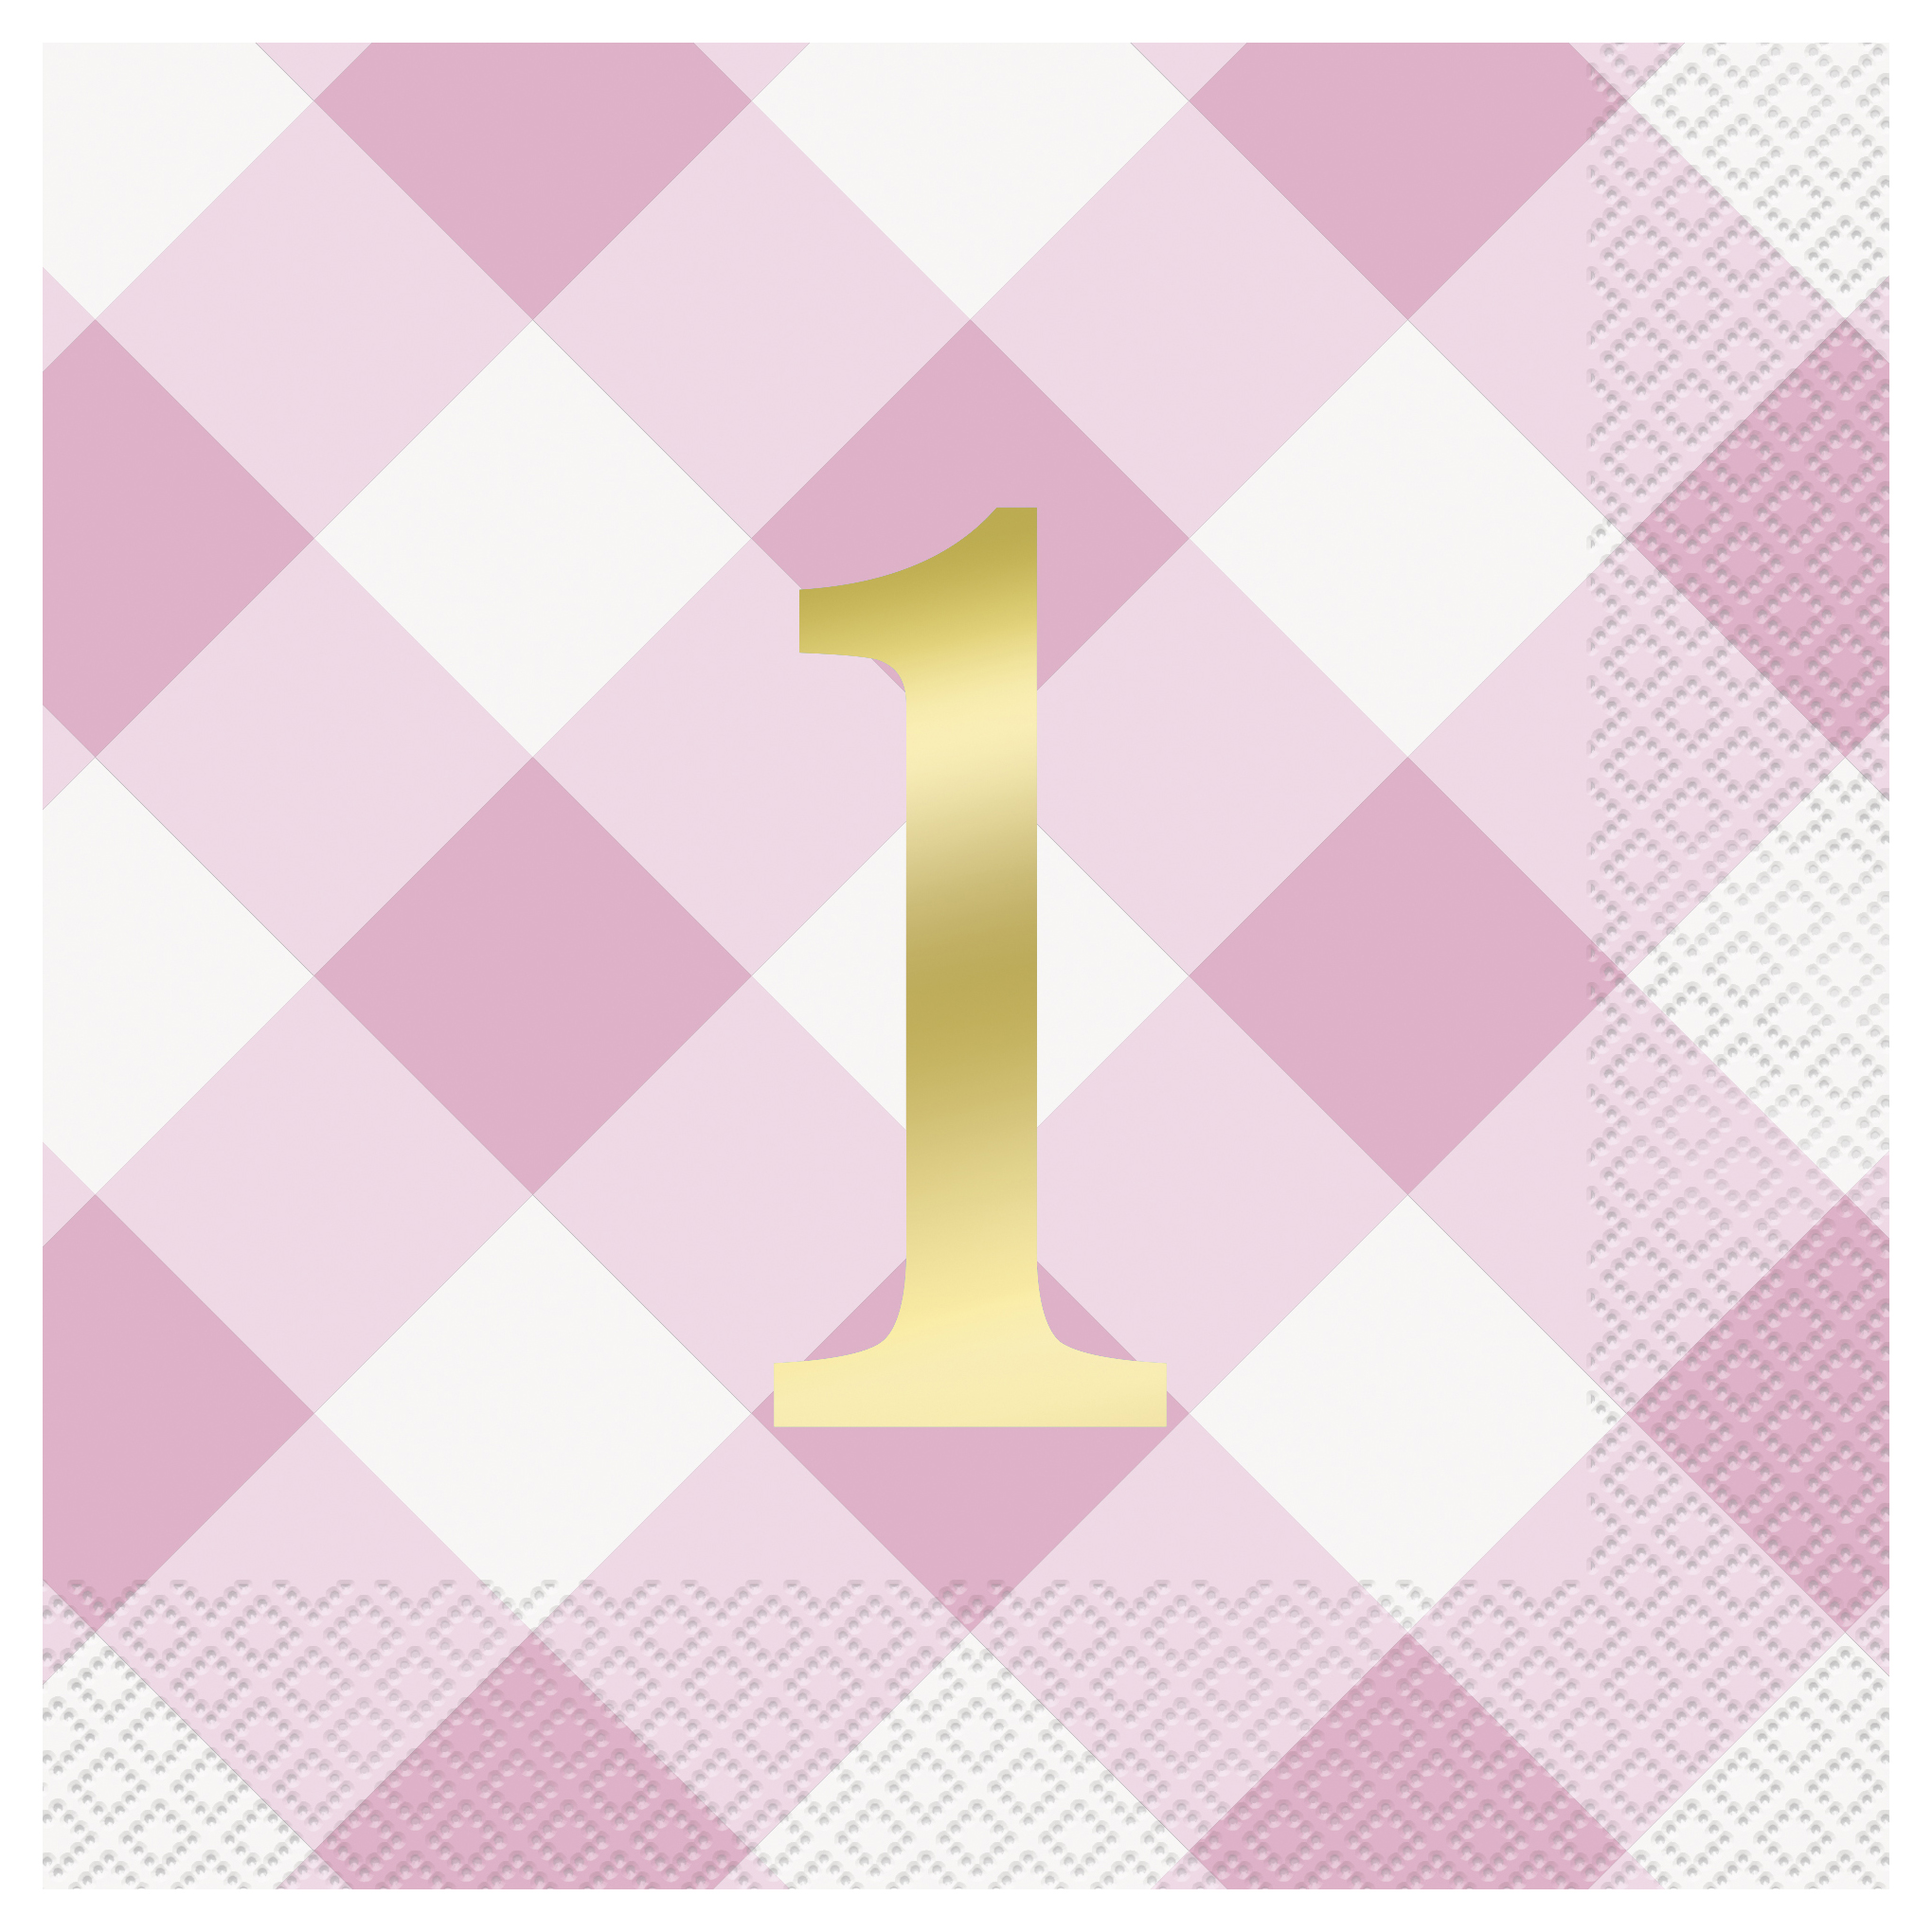 Pink Gingham 1st Birthday Party Tableware & Decorations Bundle - 16 Guests